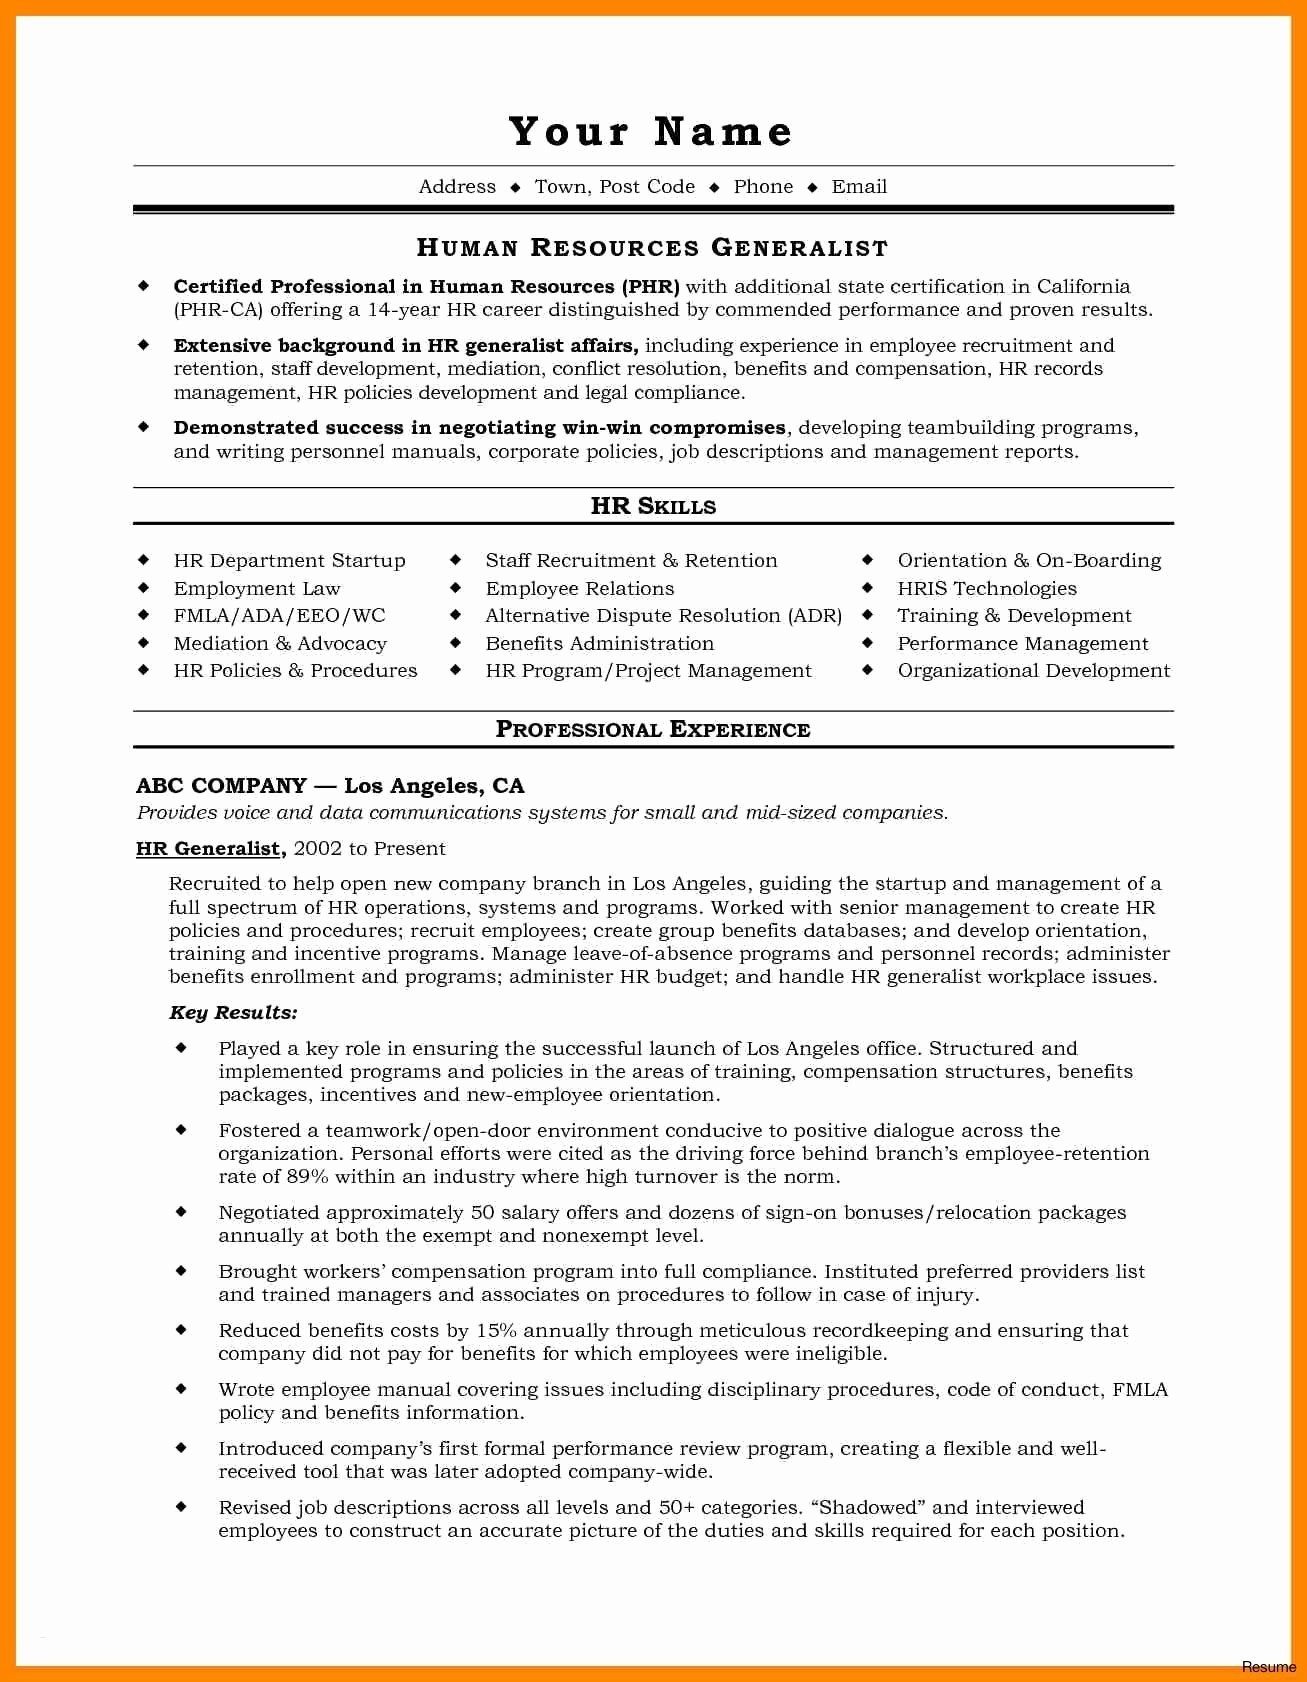 How To Write A Good Resume How To Write A Profile For A Resume Awesome Good Resumes Examples Lovely Sample Simple Resume Lovely Example A Of How To Write A Profile For A Resume how to write a good resume|wikiresume.com